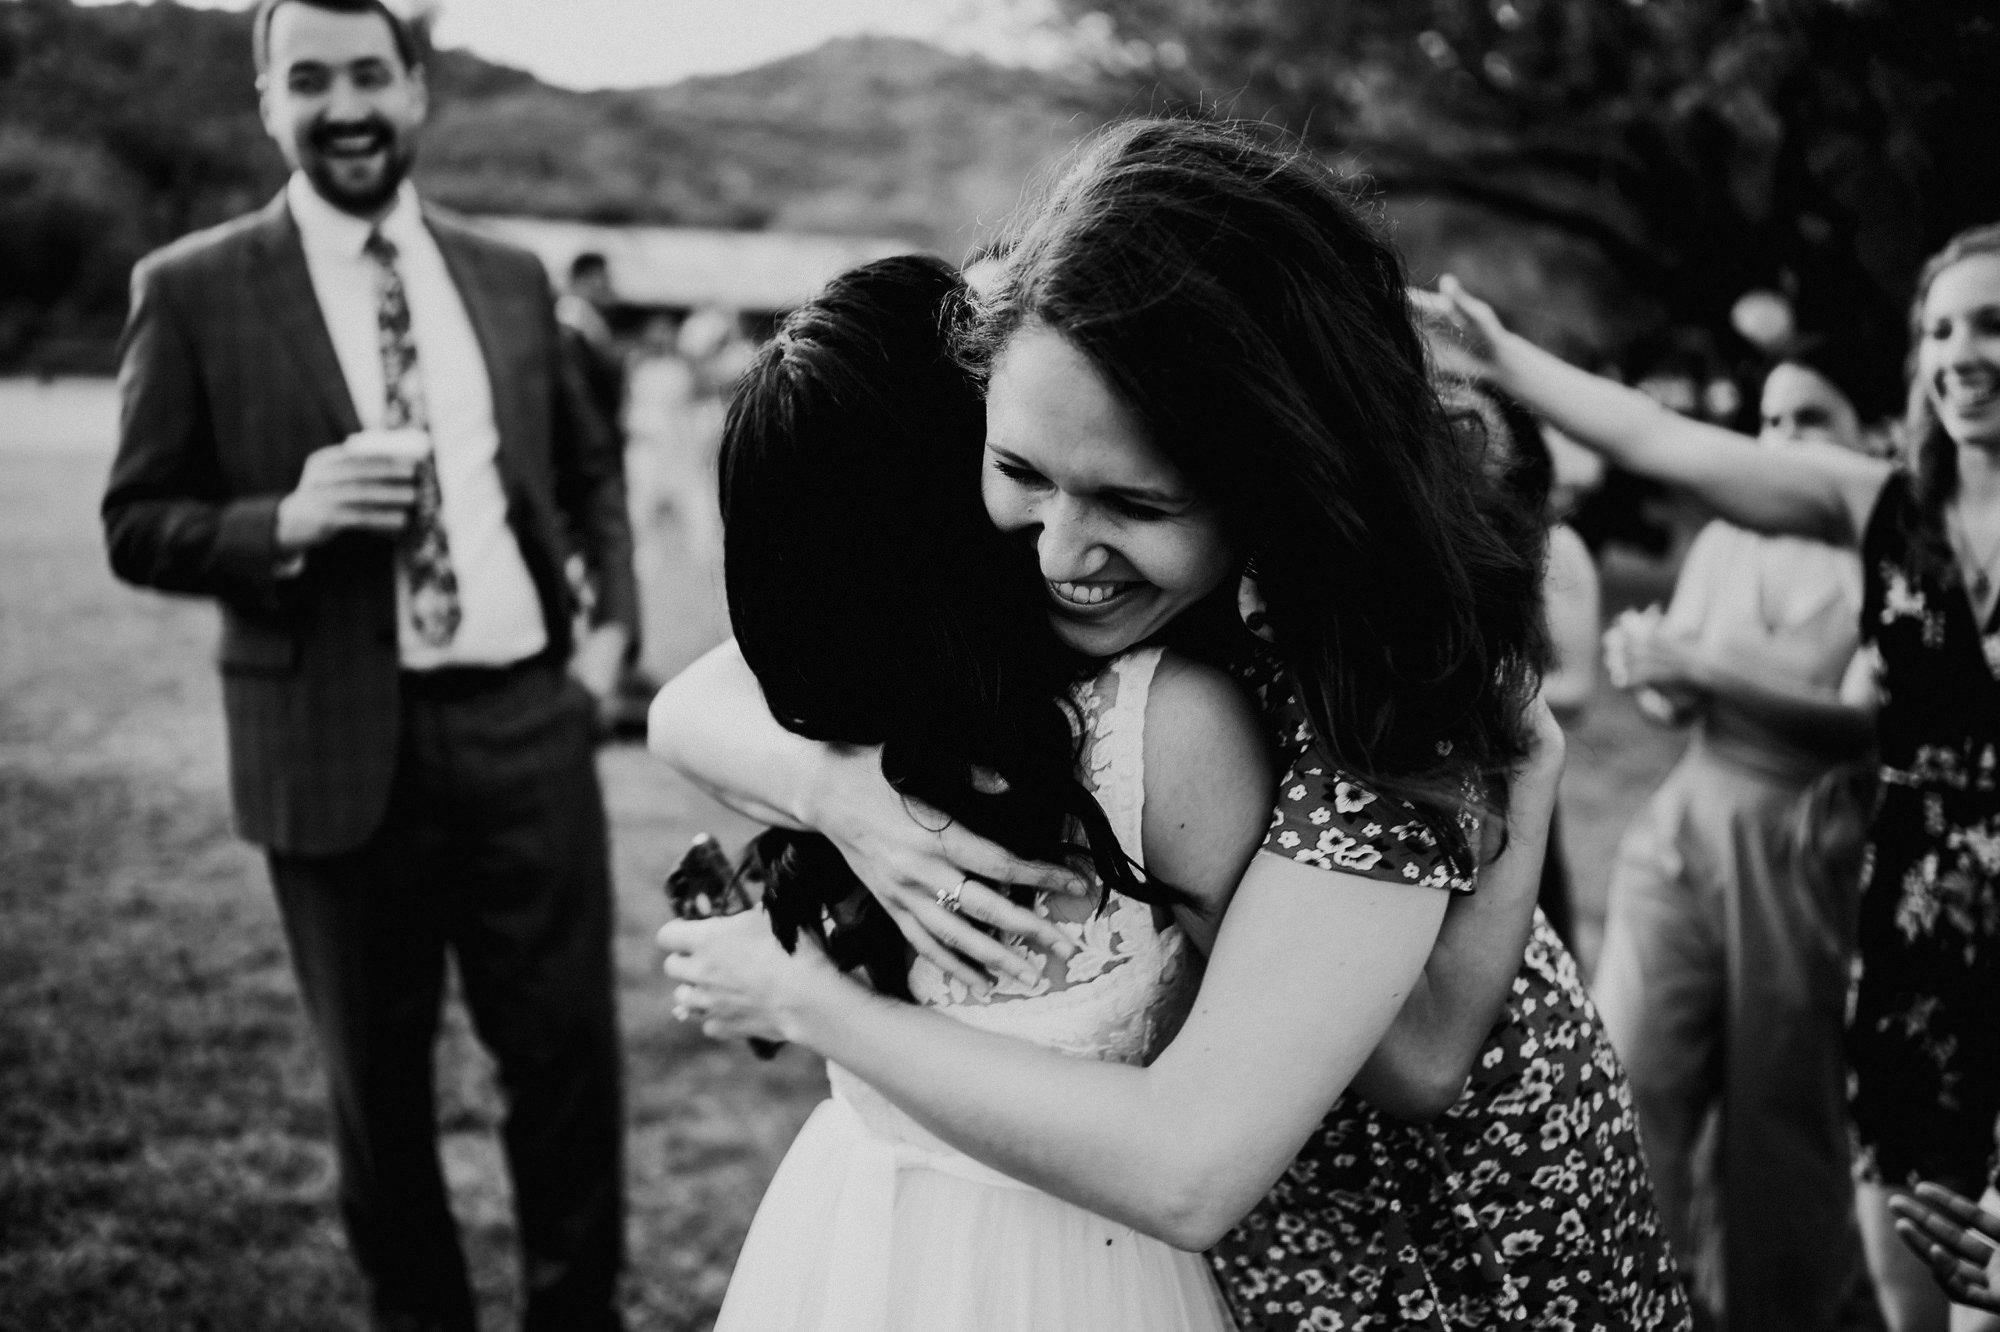 Saguaro Lake Guest Ranch The Perfect Location for a Laid-Back Fun-Filled Wedding. The best documentary wedding photographer Mantas Kubilinskas-39.jpg